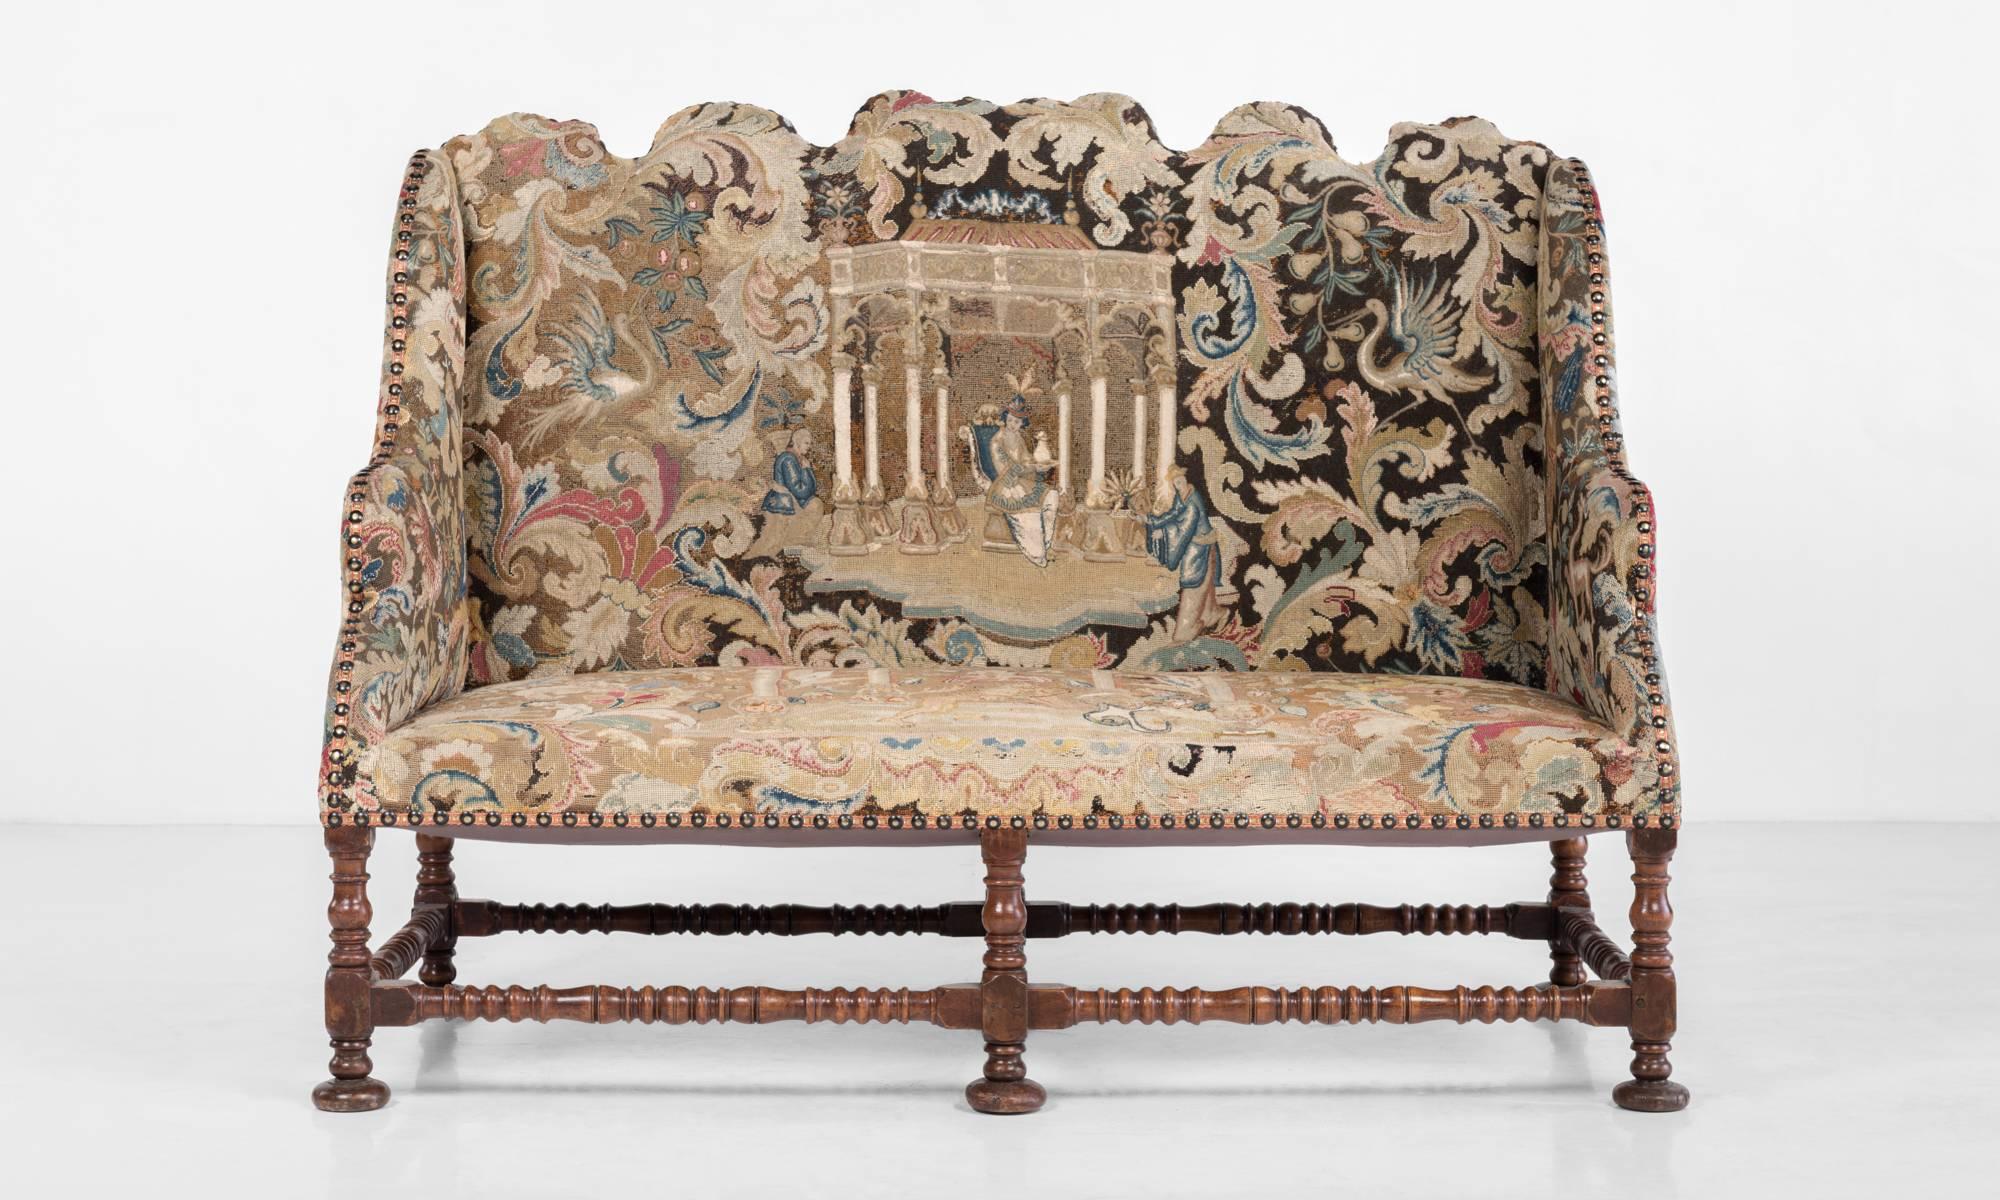 French Tapestry sofa, circa 1880.

Original tapestry upholstery, with handsome turned legs and stretchers.